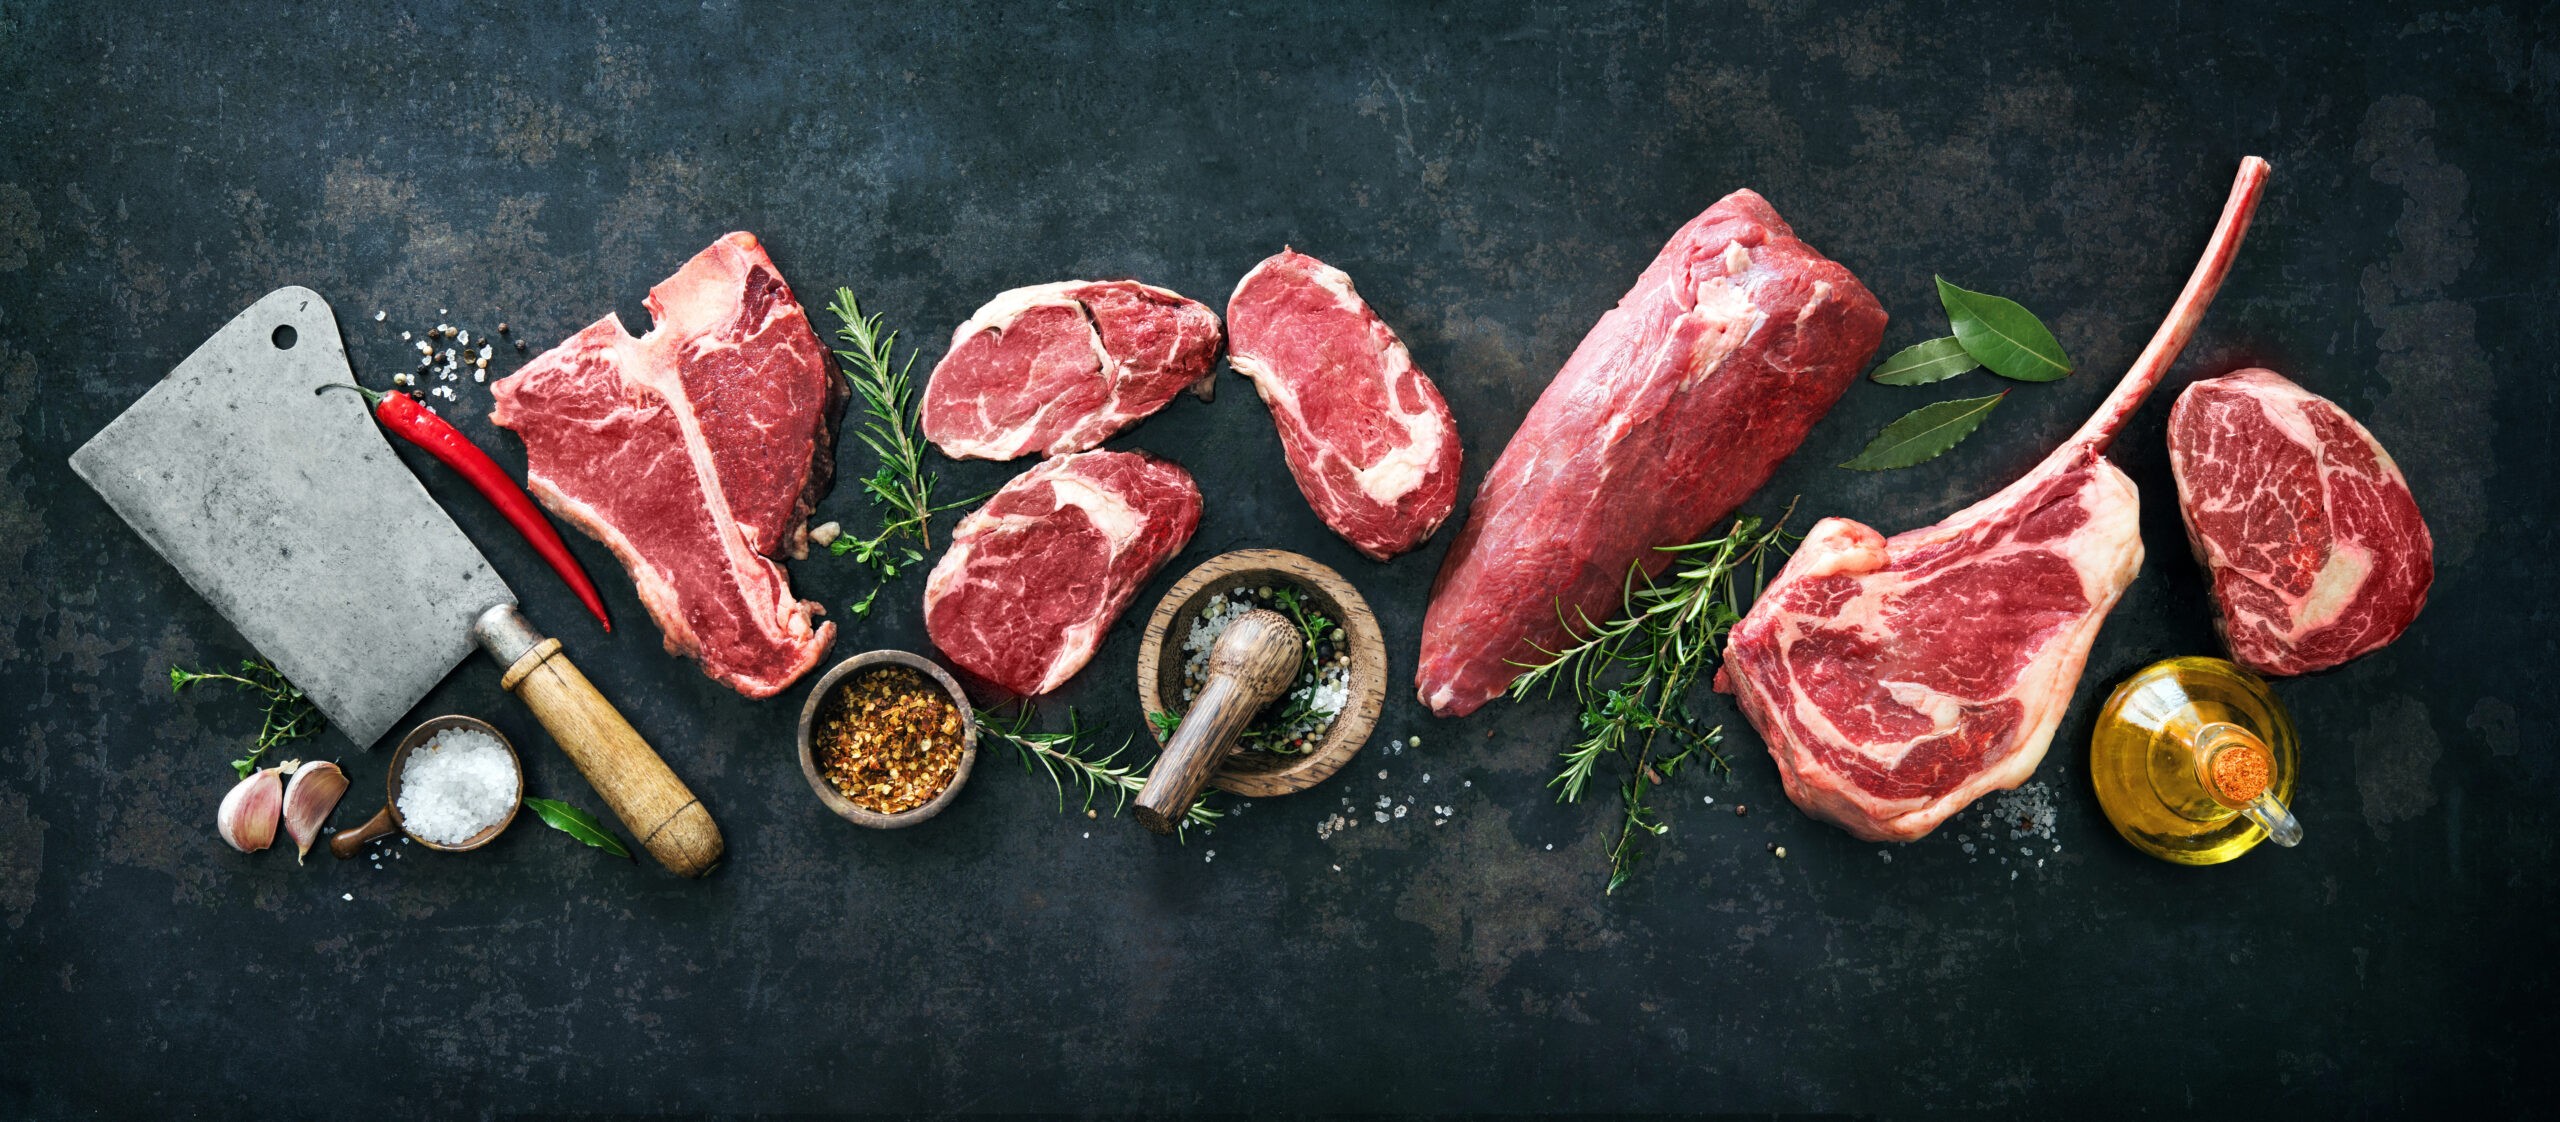 7 Health Benefits Of Red Meat